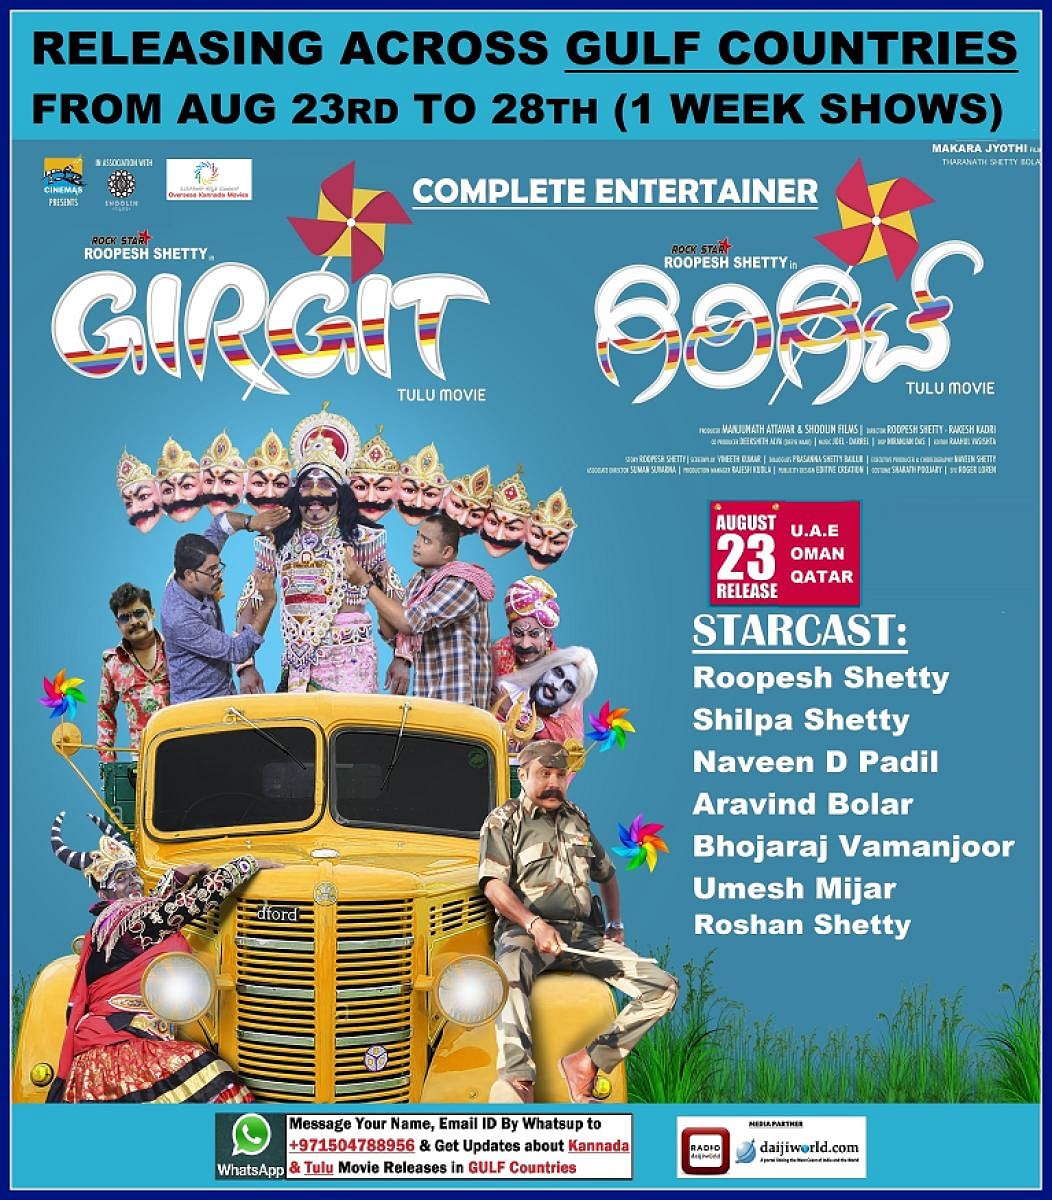 The Tulu film ‘Girgit’ has been running to packed halls since its release on August 30.